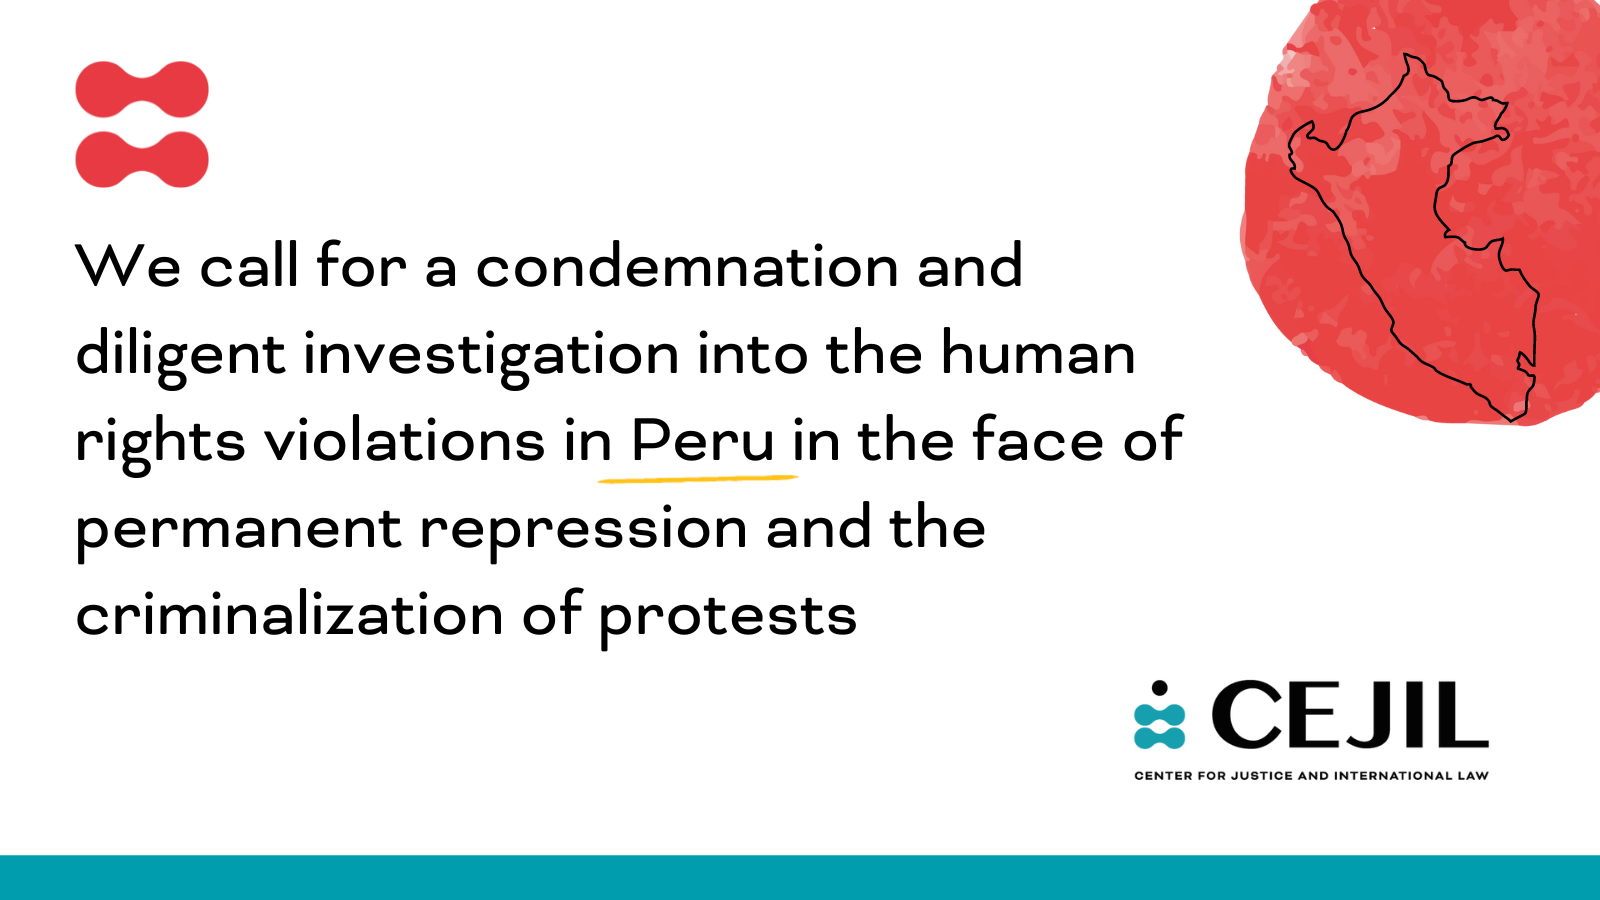 We call for a condemnation and diligent investigation into the human